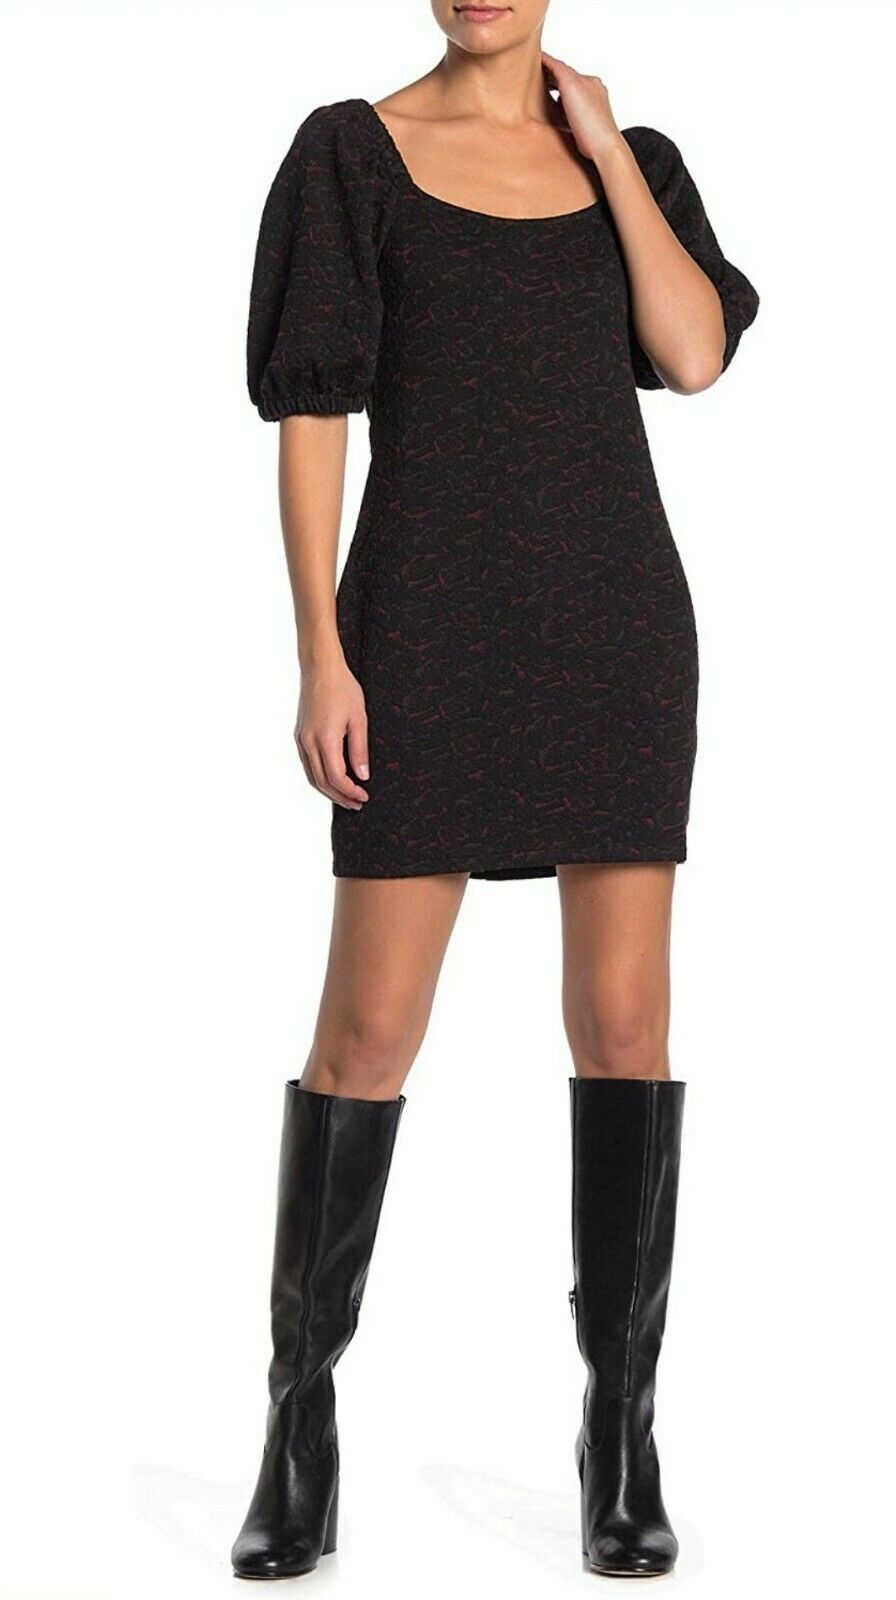 Color: Blacks Size Type: Regular Size (Women's): M Neckline: Square Neck Pattern: Geometric Sleeve Length: Half Sleeve Style: Sheath Occasion: Casual Dress Length: Short Material: Polyester Zipper: None